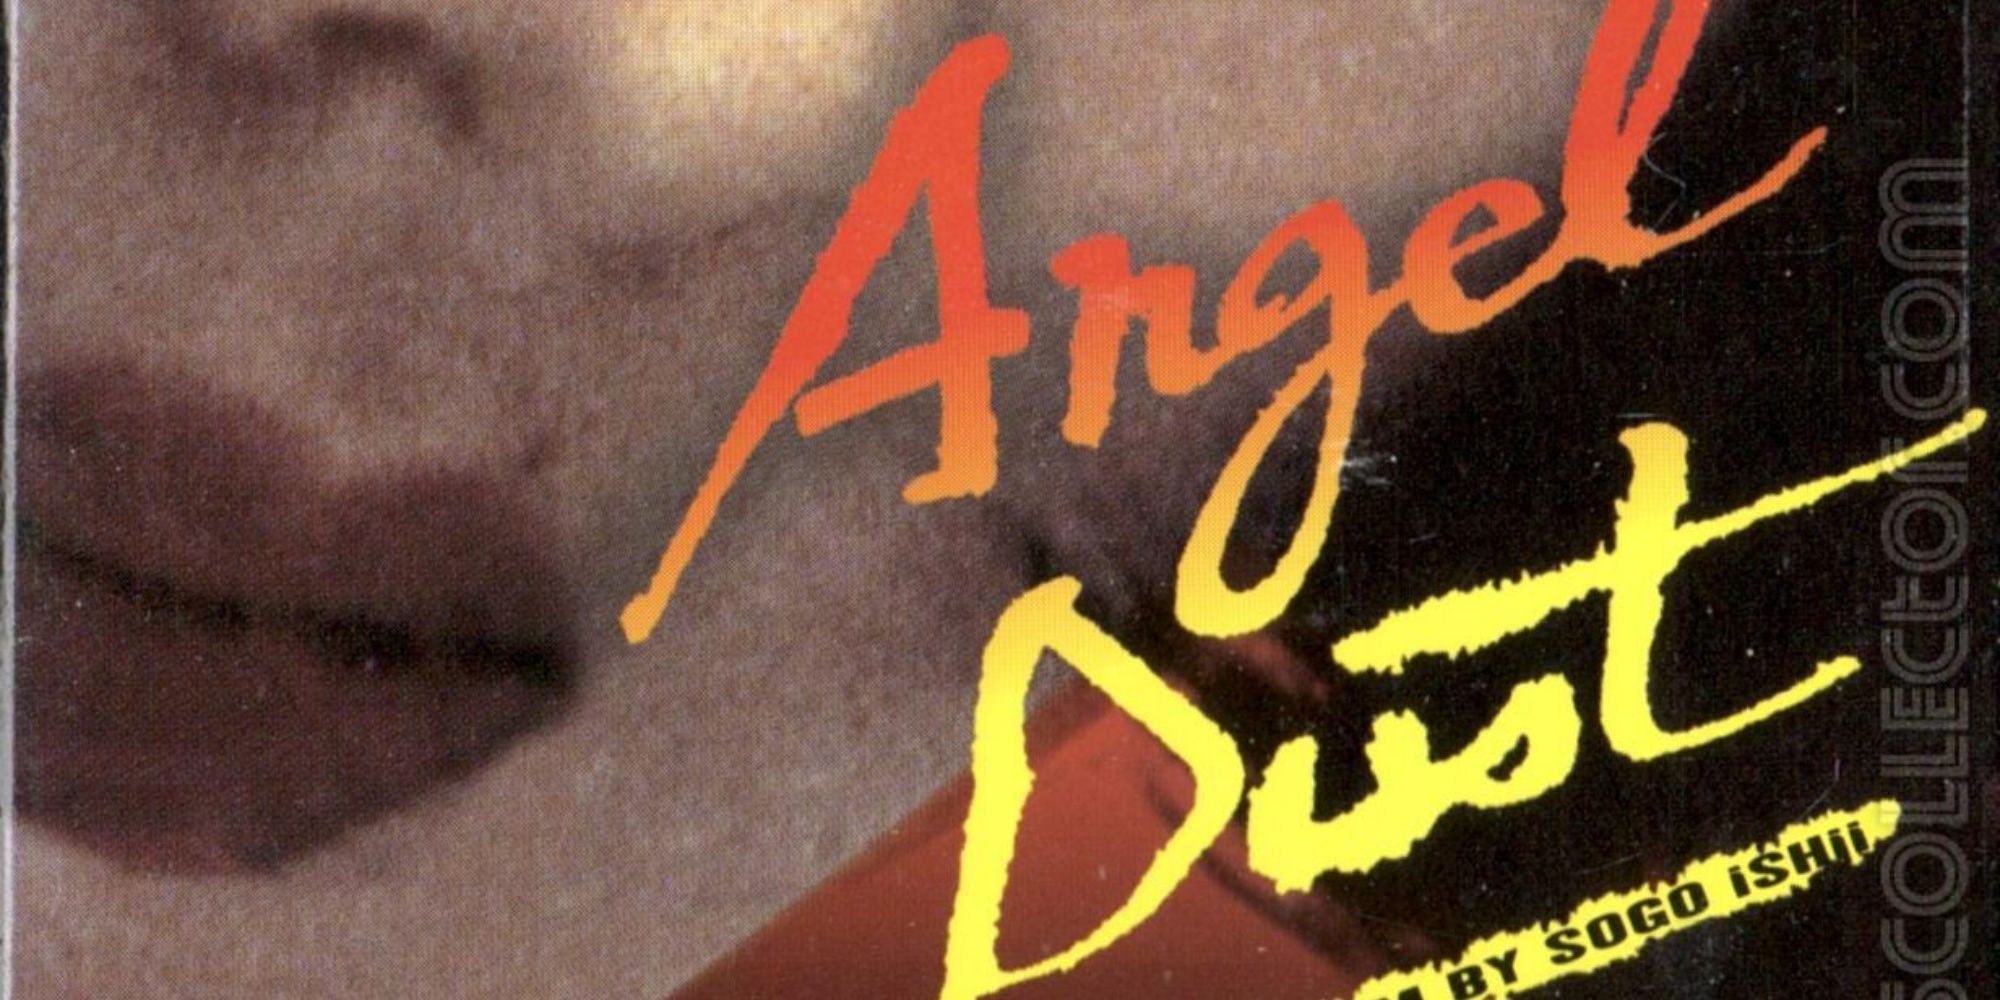 The title card for Angel Dust with a close-up of a woman's face